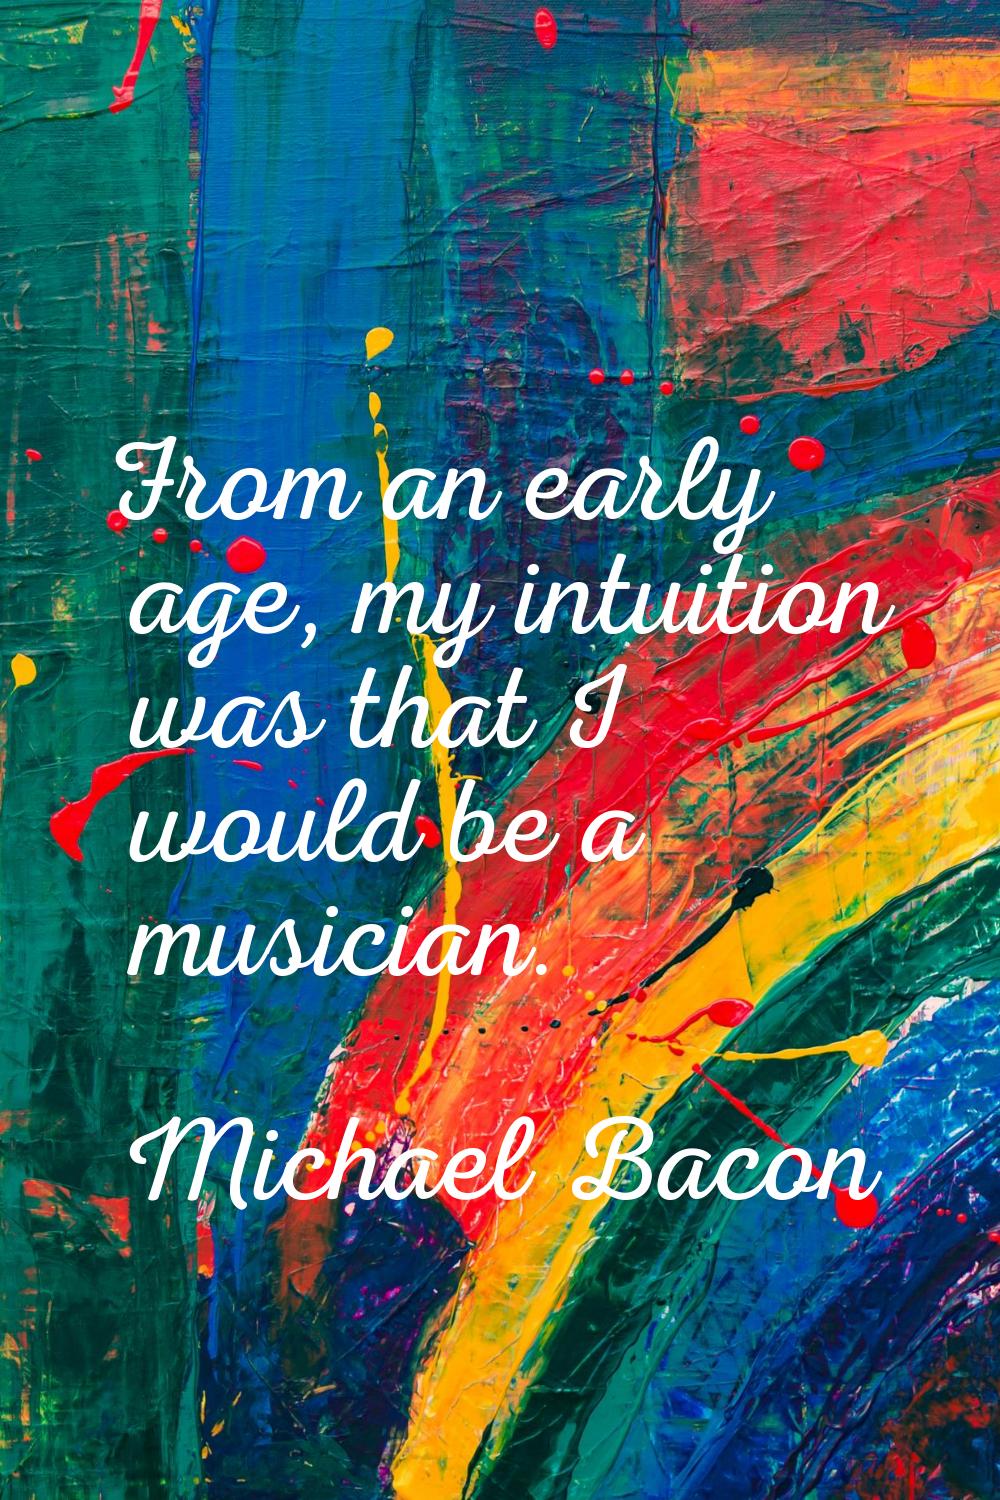 From an early age, my intuition was that I would be a musician.